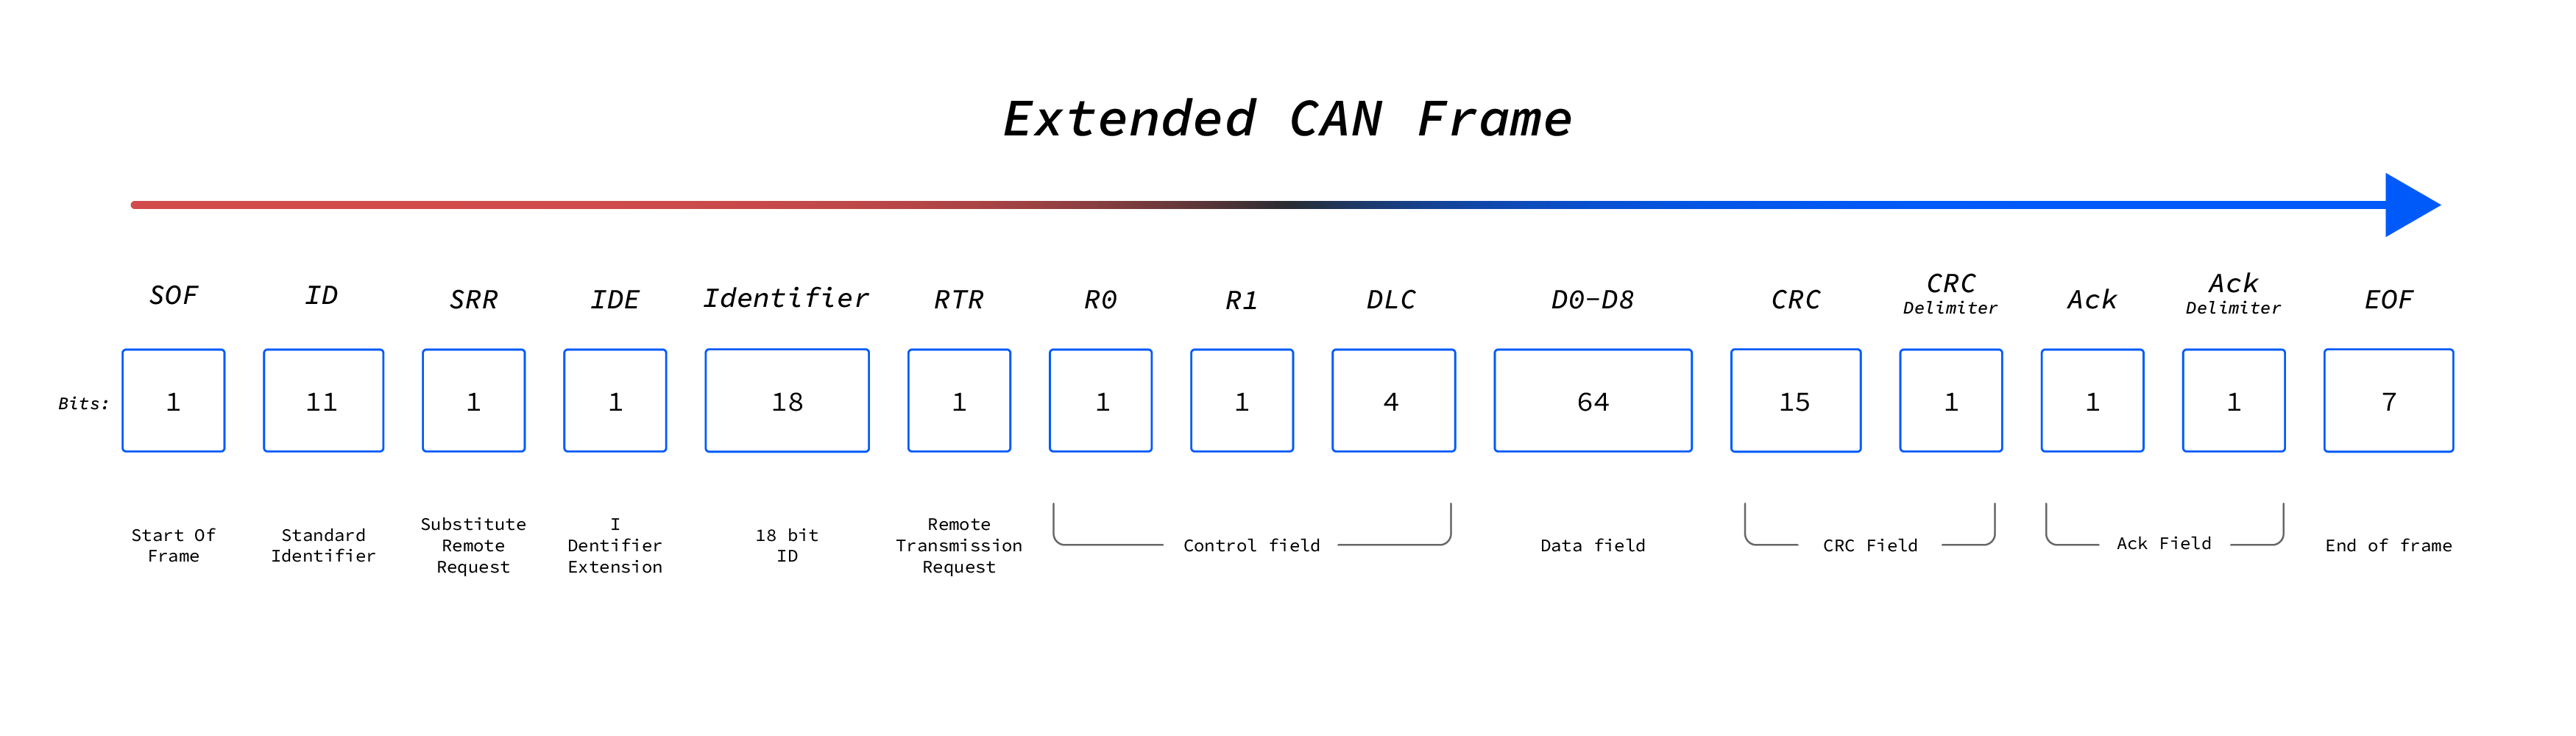 Extended CAN frame explained